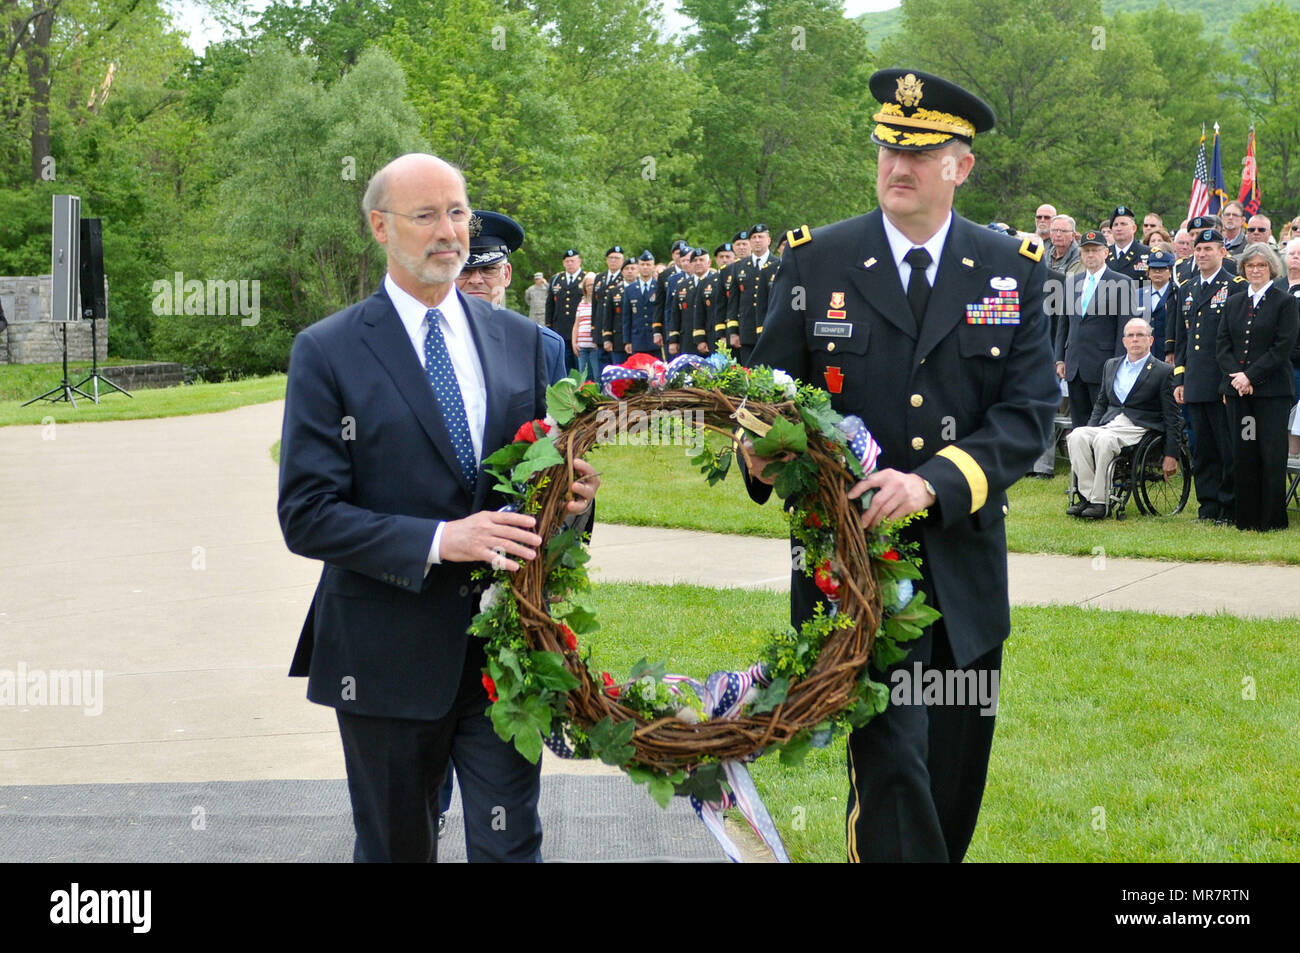 Pa. Gov. Tom Wolf and 28th Infantry Division Commander Brig. Gen. Andrew Schafer carry a wreath for placement at the division shrine in Boalsburg during the division's Annual Memorial Service May 21, 2017. Stock Photo